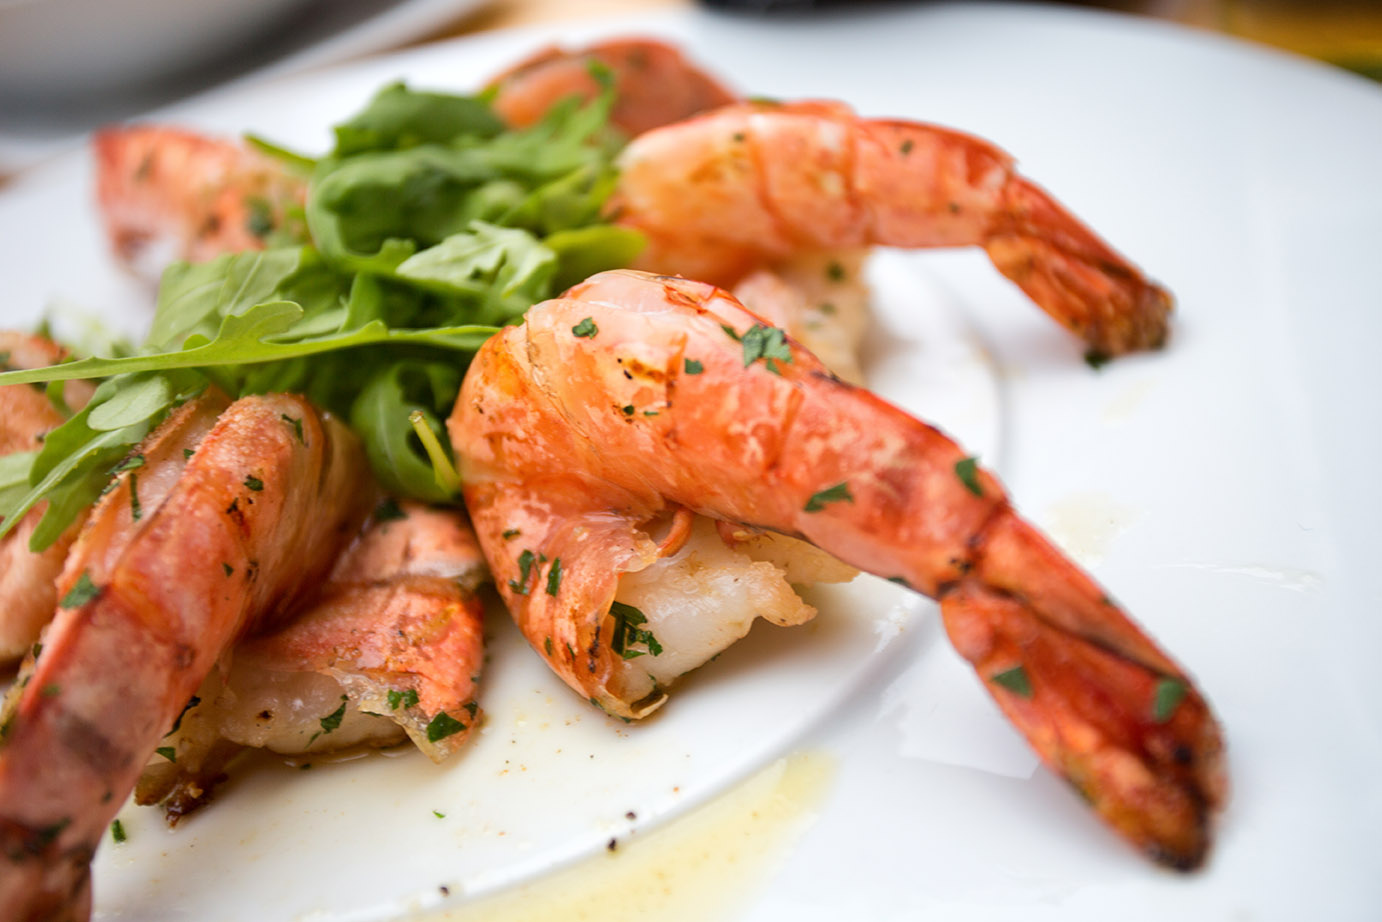 Large sautéed shrimp displayed with asian greens on a white plate.